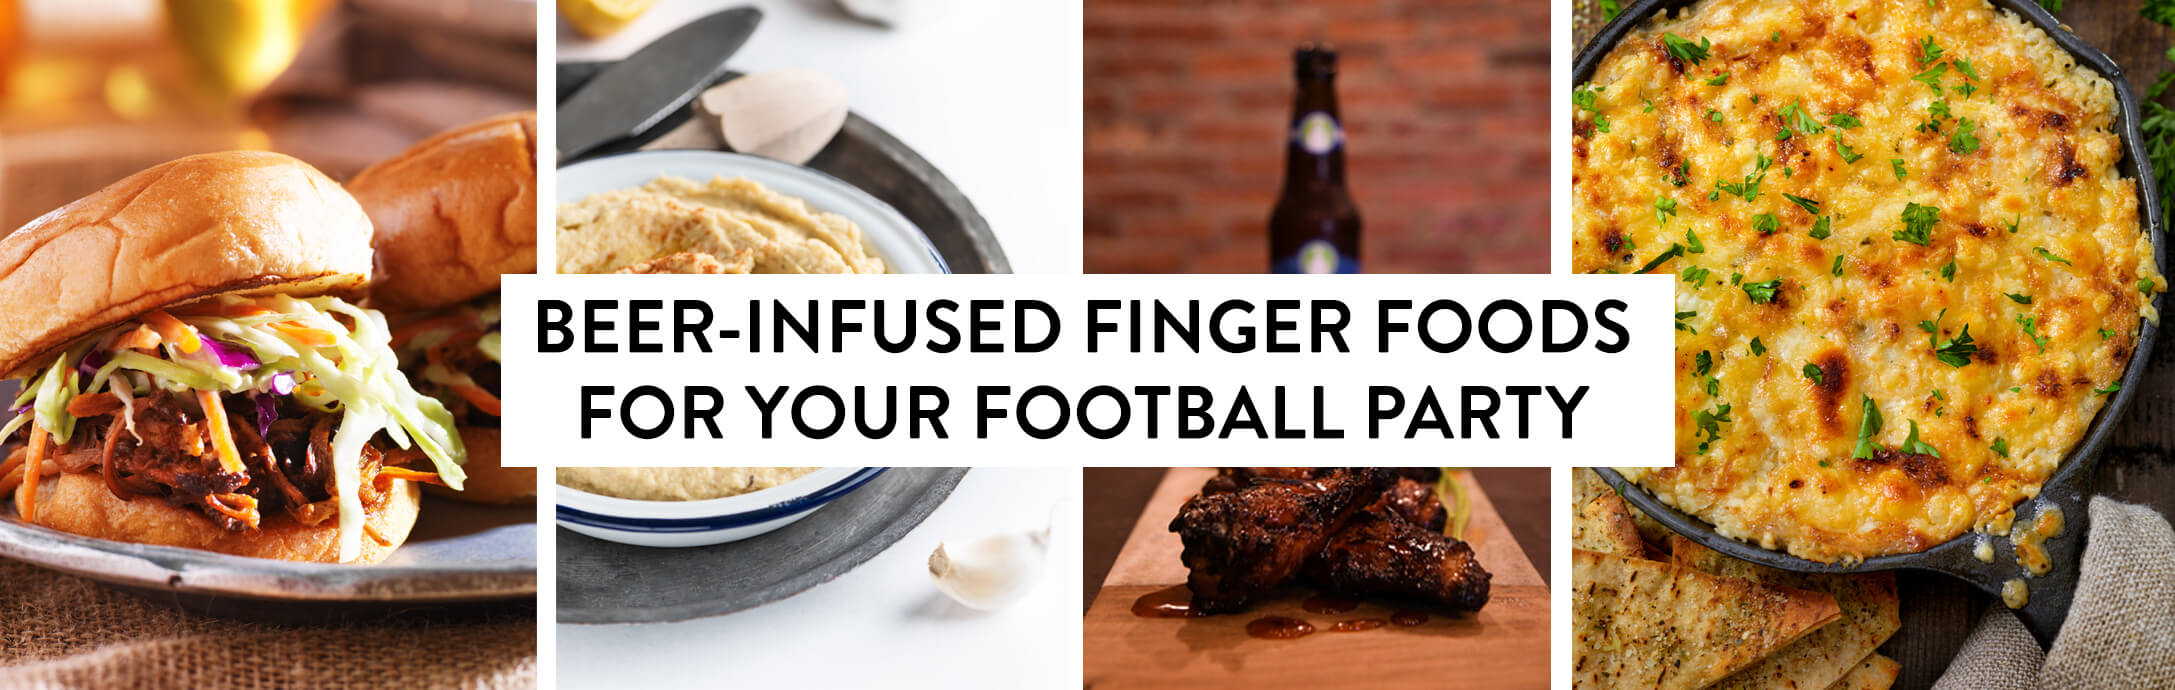 Beer-Infused Finger Foods for your Football Party